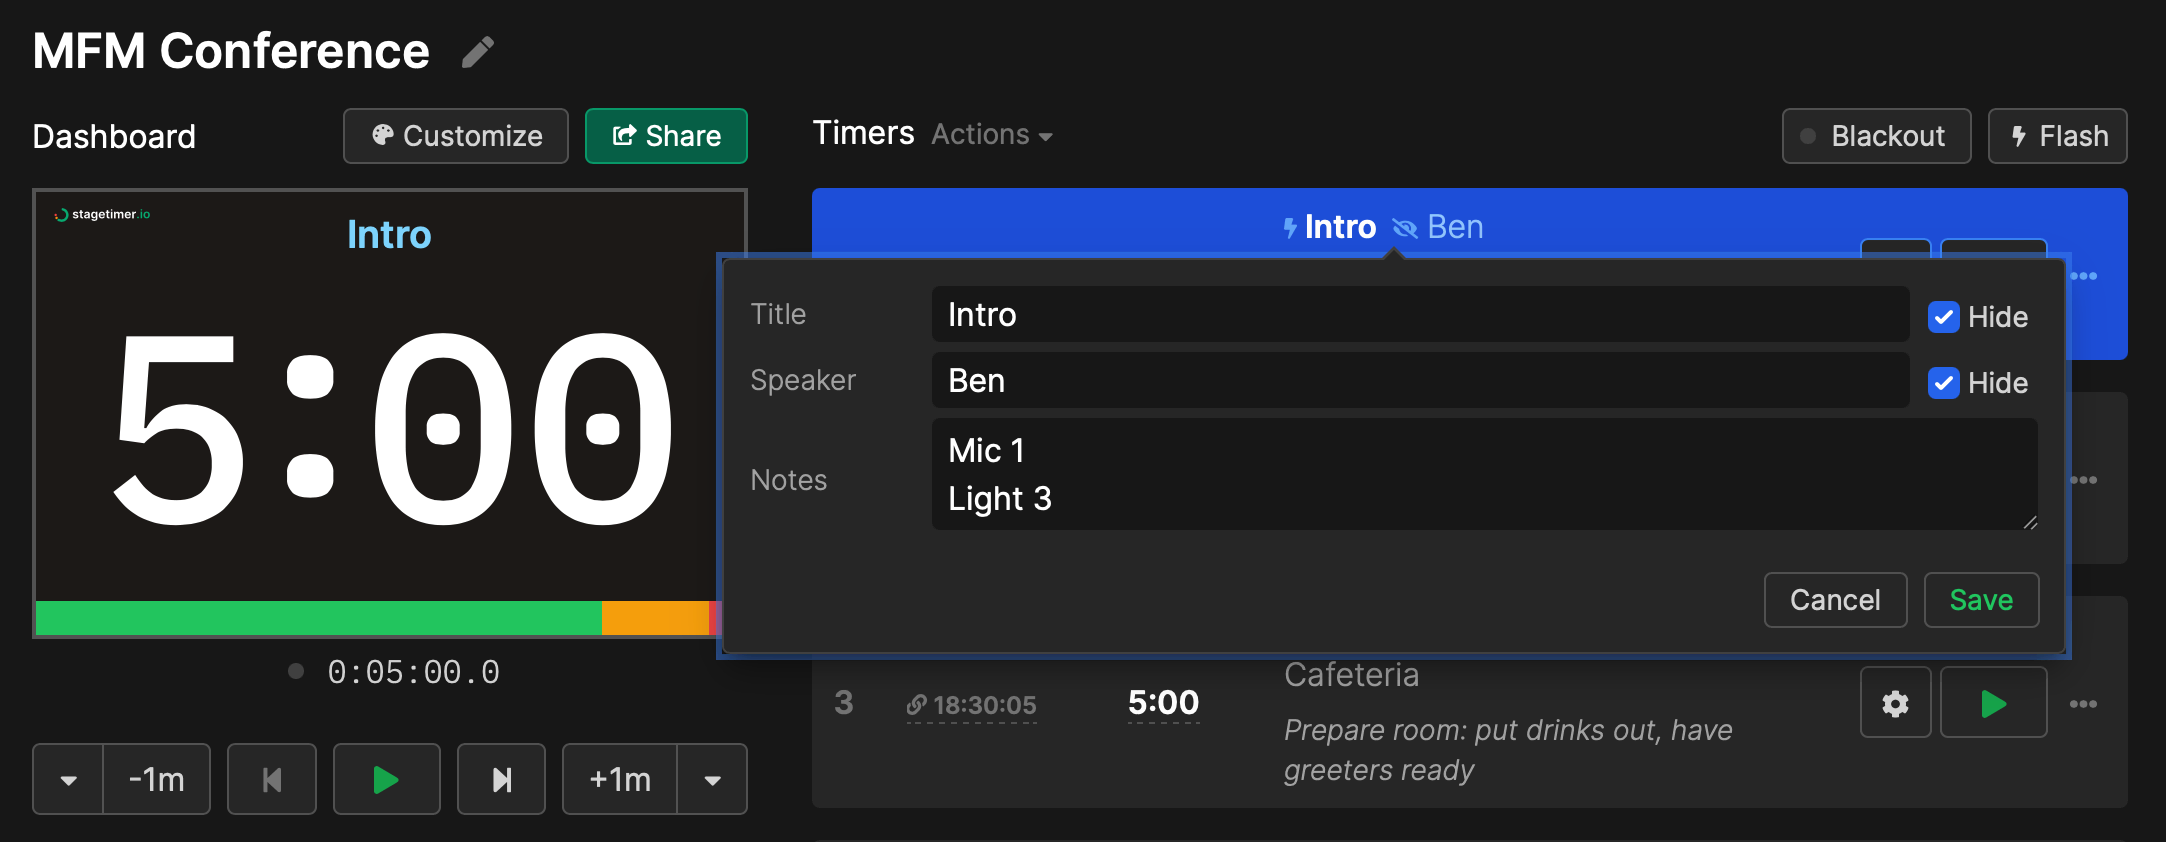 Even when hiding the title and speaker from the timer view, the information is available on the agenda link.